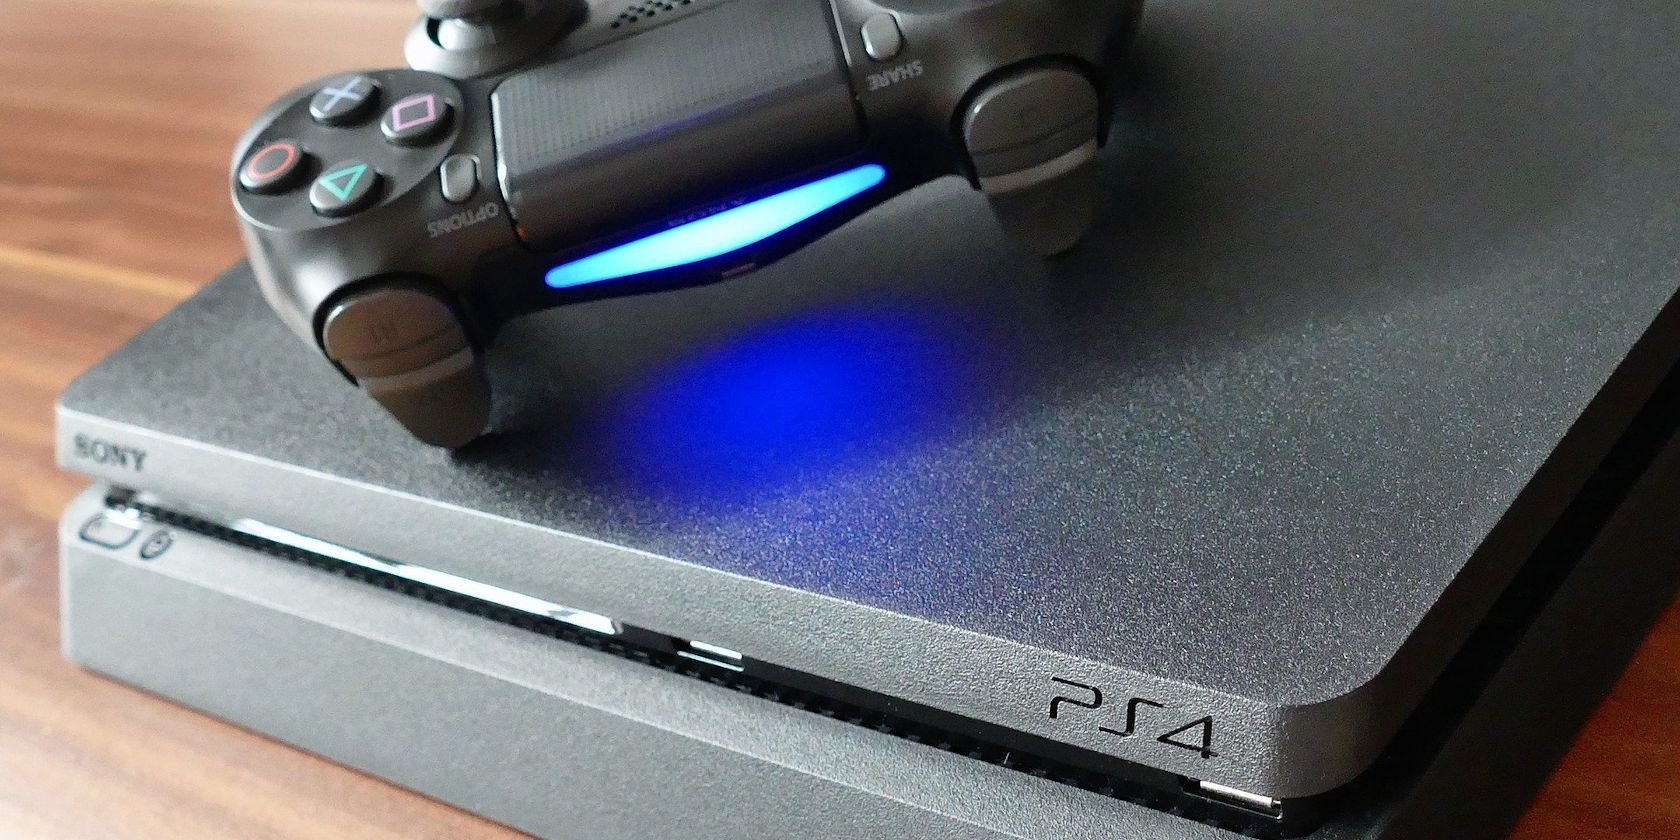 Is Sony Making a Mistake Closing PlayStation Communities?